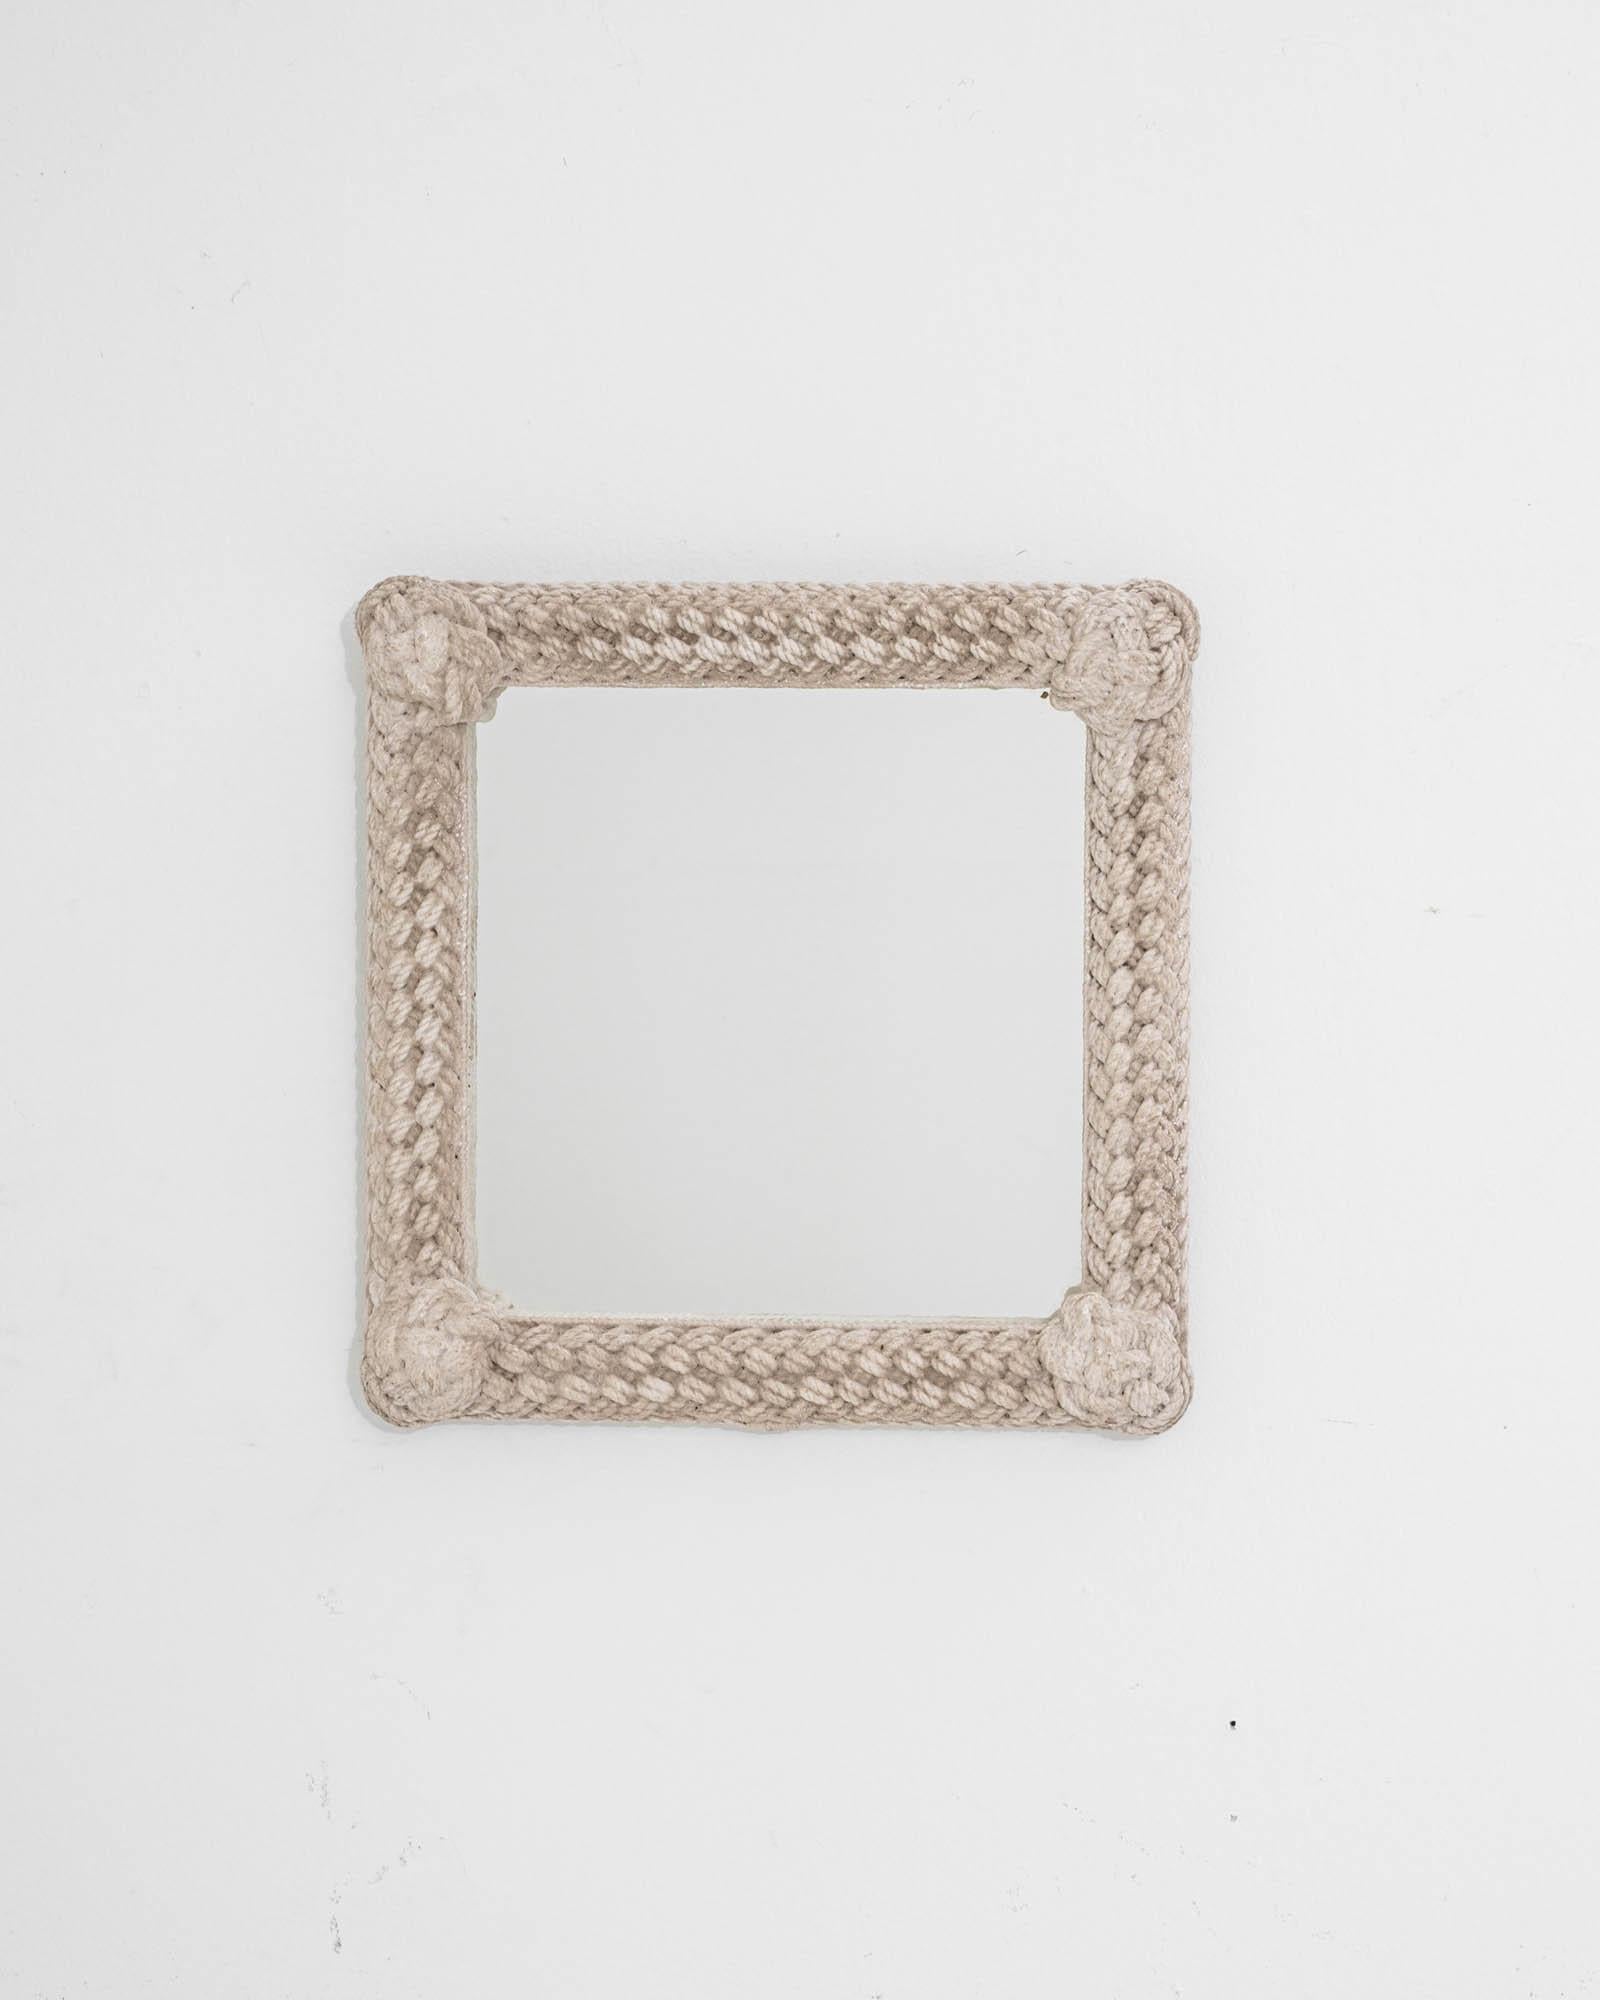 A wooden mirror created in 20th Century France. A truly dazzling work of art, this exquisite mirror exudes a sense of humble regality, articulated effortlessly with a unique motif. The frame of this mirror has been rendered as knotted rope, which